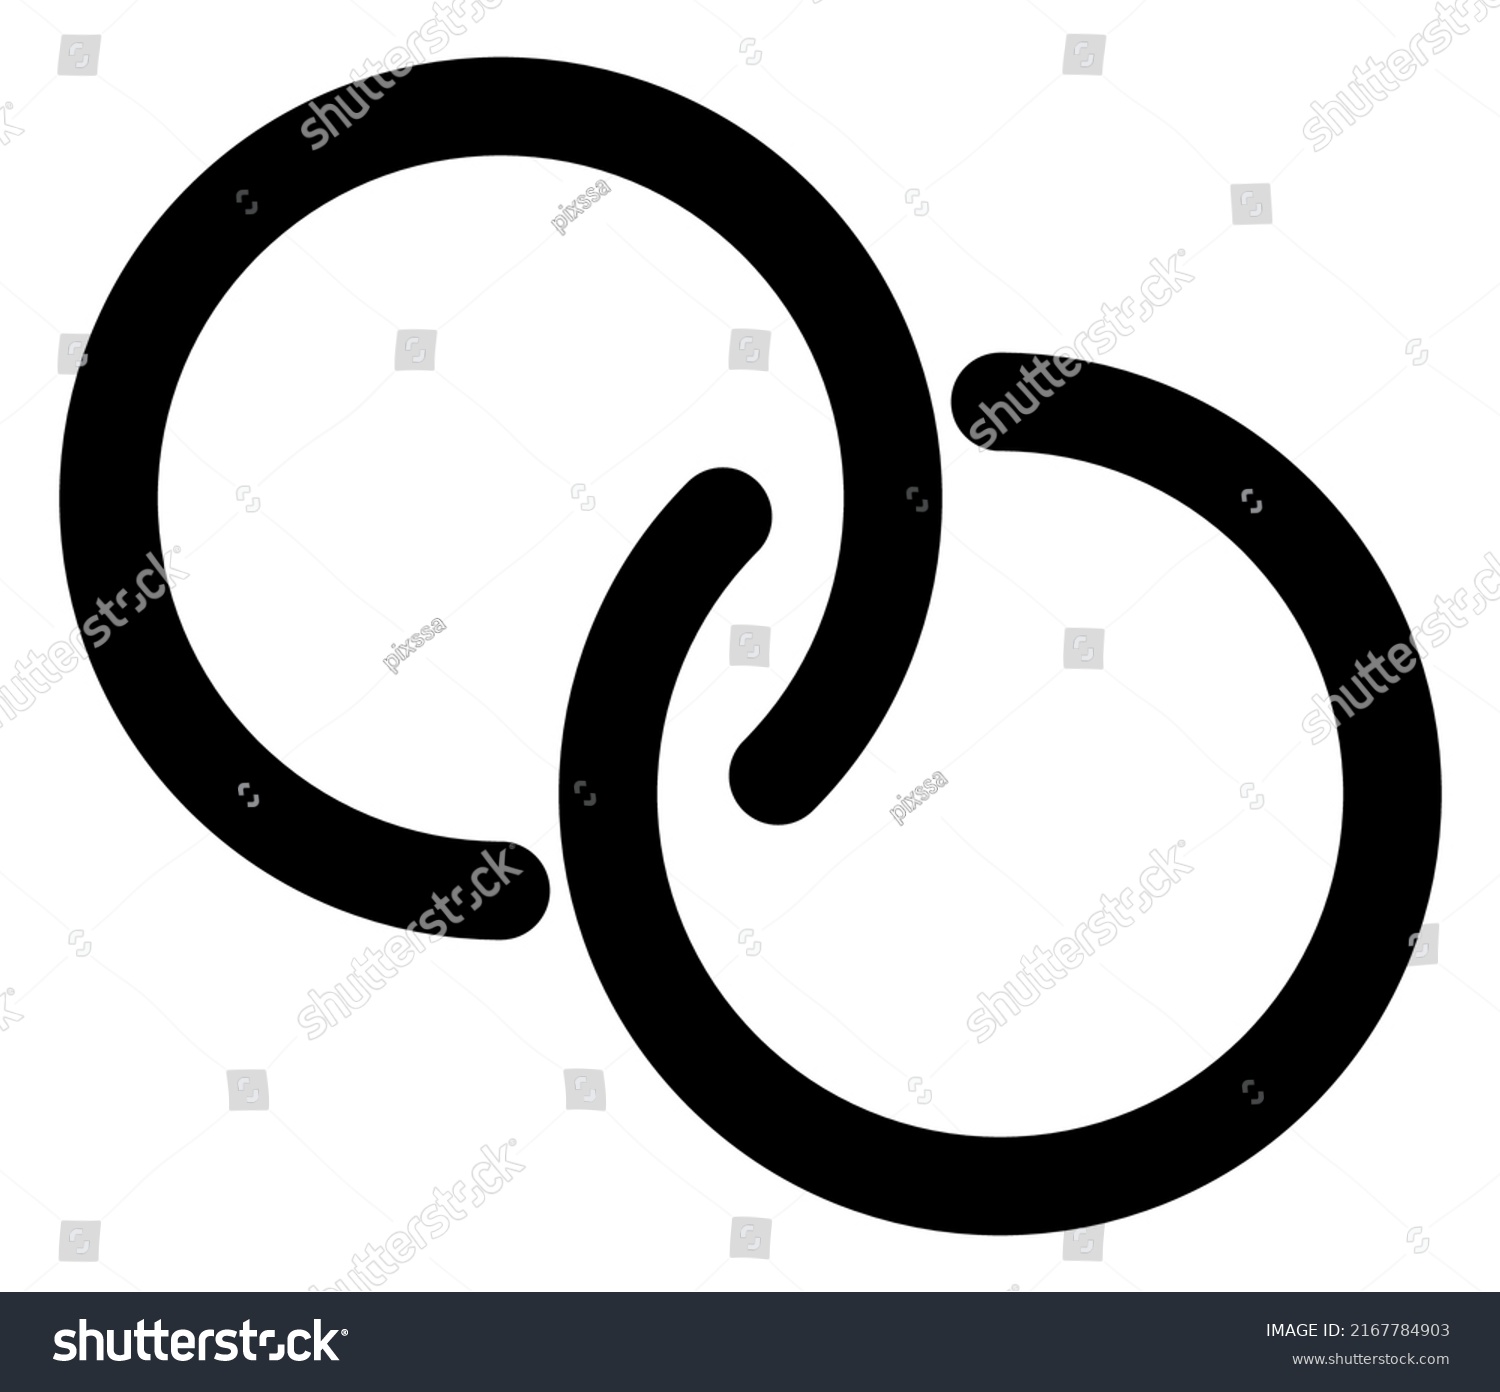 2,546 Intertwined rings Images, Stock Photos & Vectors | Shutterstock